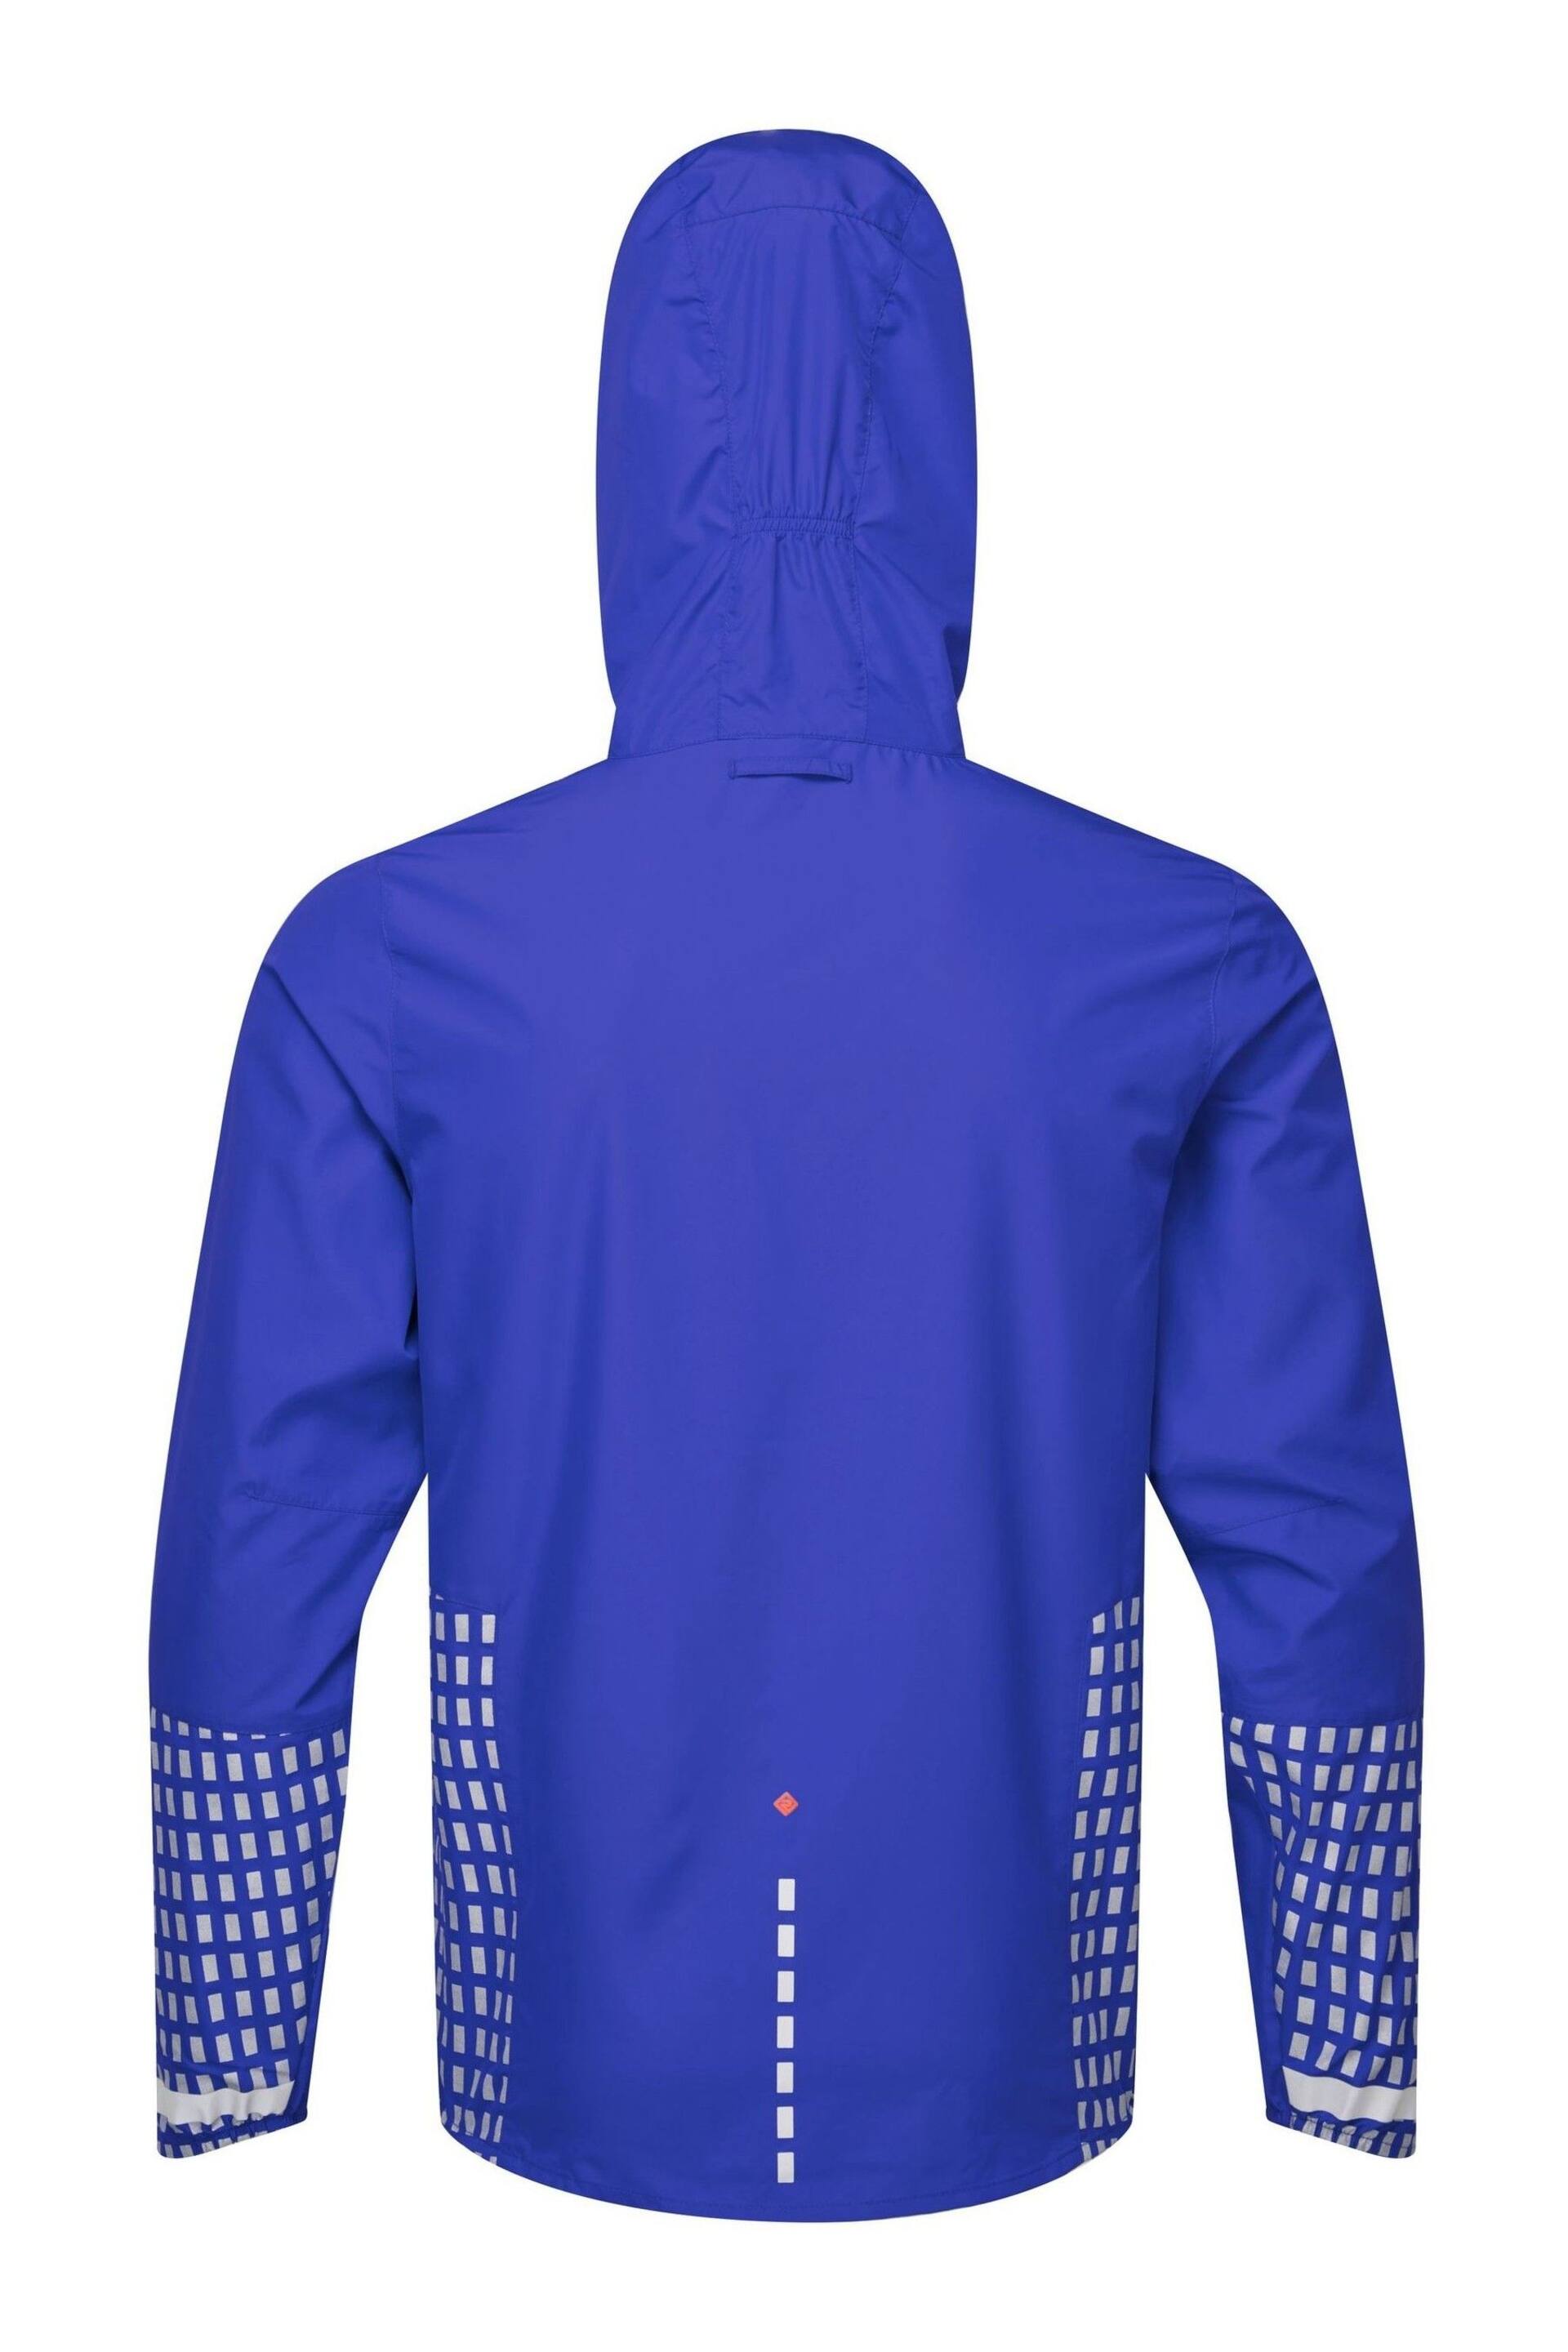 Ronhill Mens Blue Tech Reflective Afterhours Running Jacket - Image 6 of 6